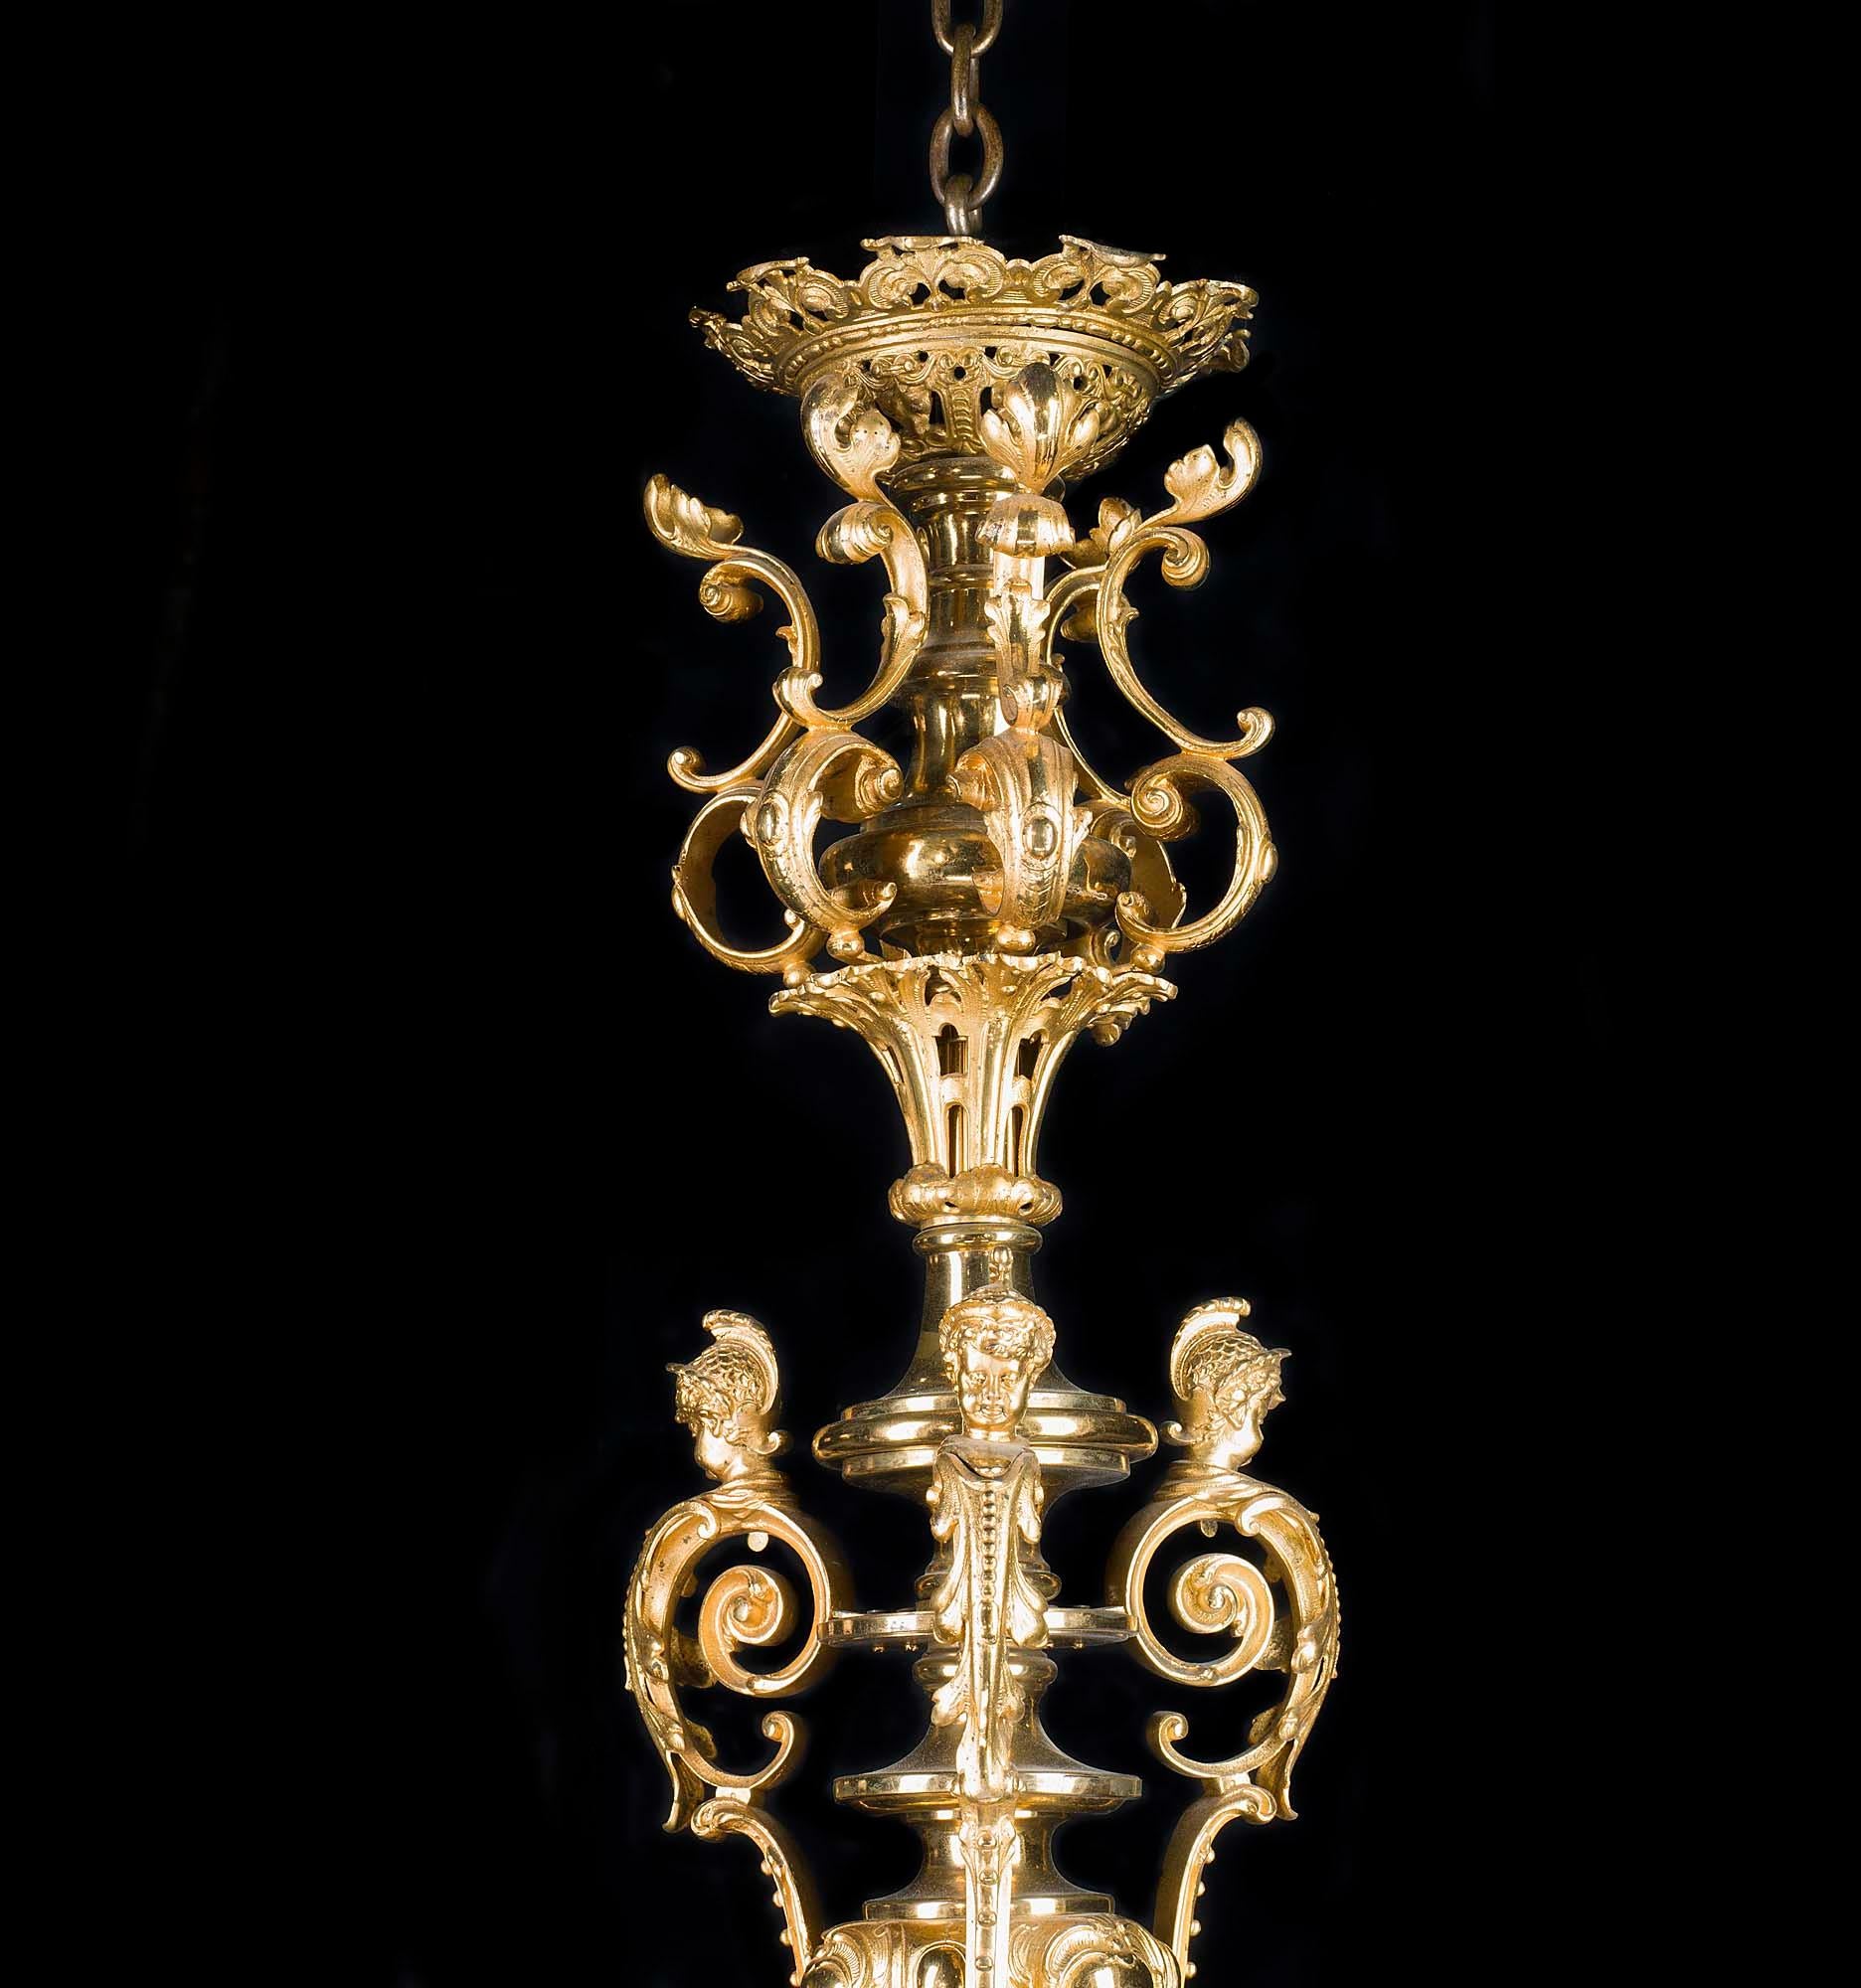 A very beautiful and large Louis XVI style six branch ormolu chandelier in the Rococo manner. The central stepped stem, suspended from a delicately cut dish corona resting on a bulbous vase framed amid scrolling foliate detail, is embellished by a